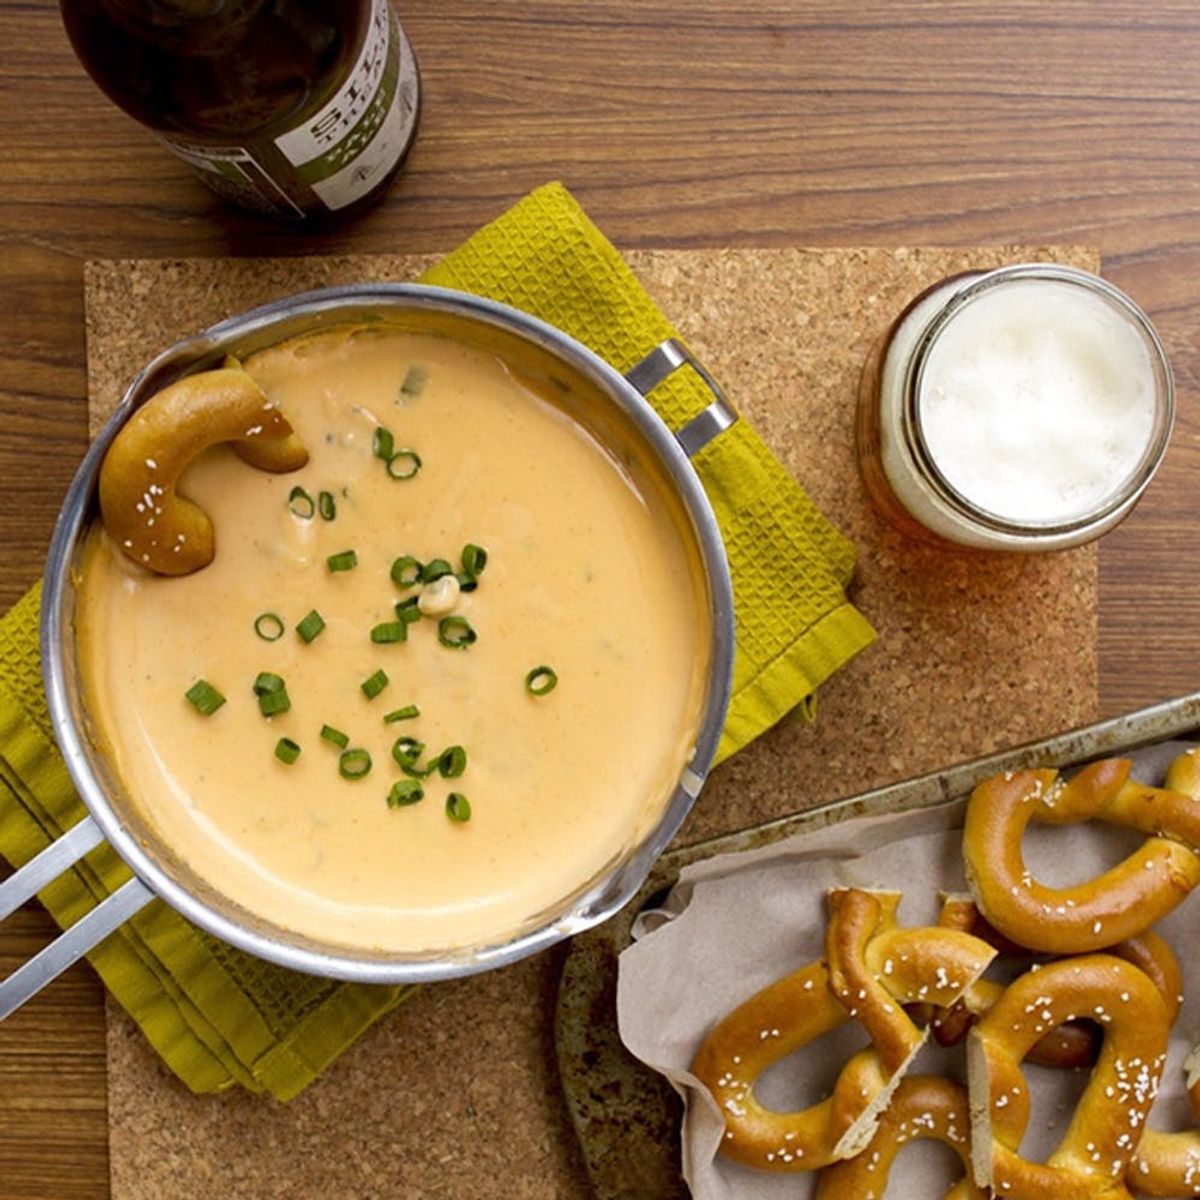 12 Appetizer Recipes You *Need* for Your Super Bowl Party